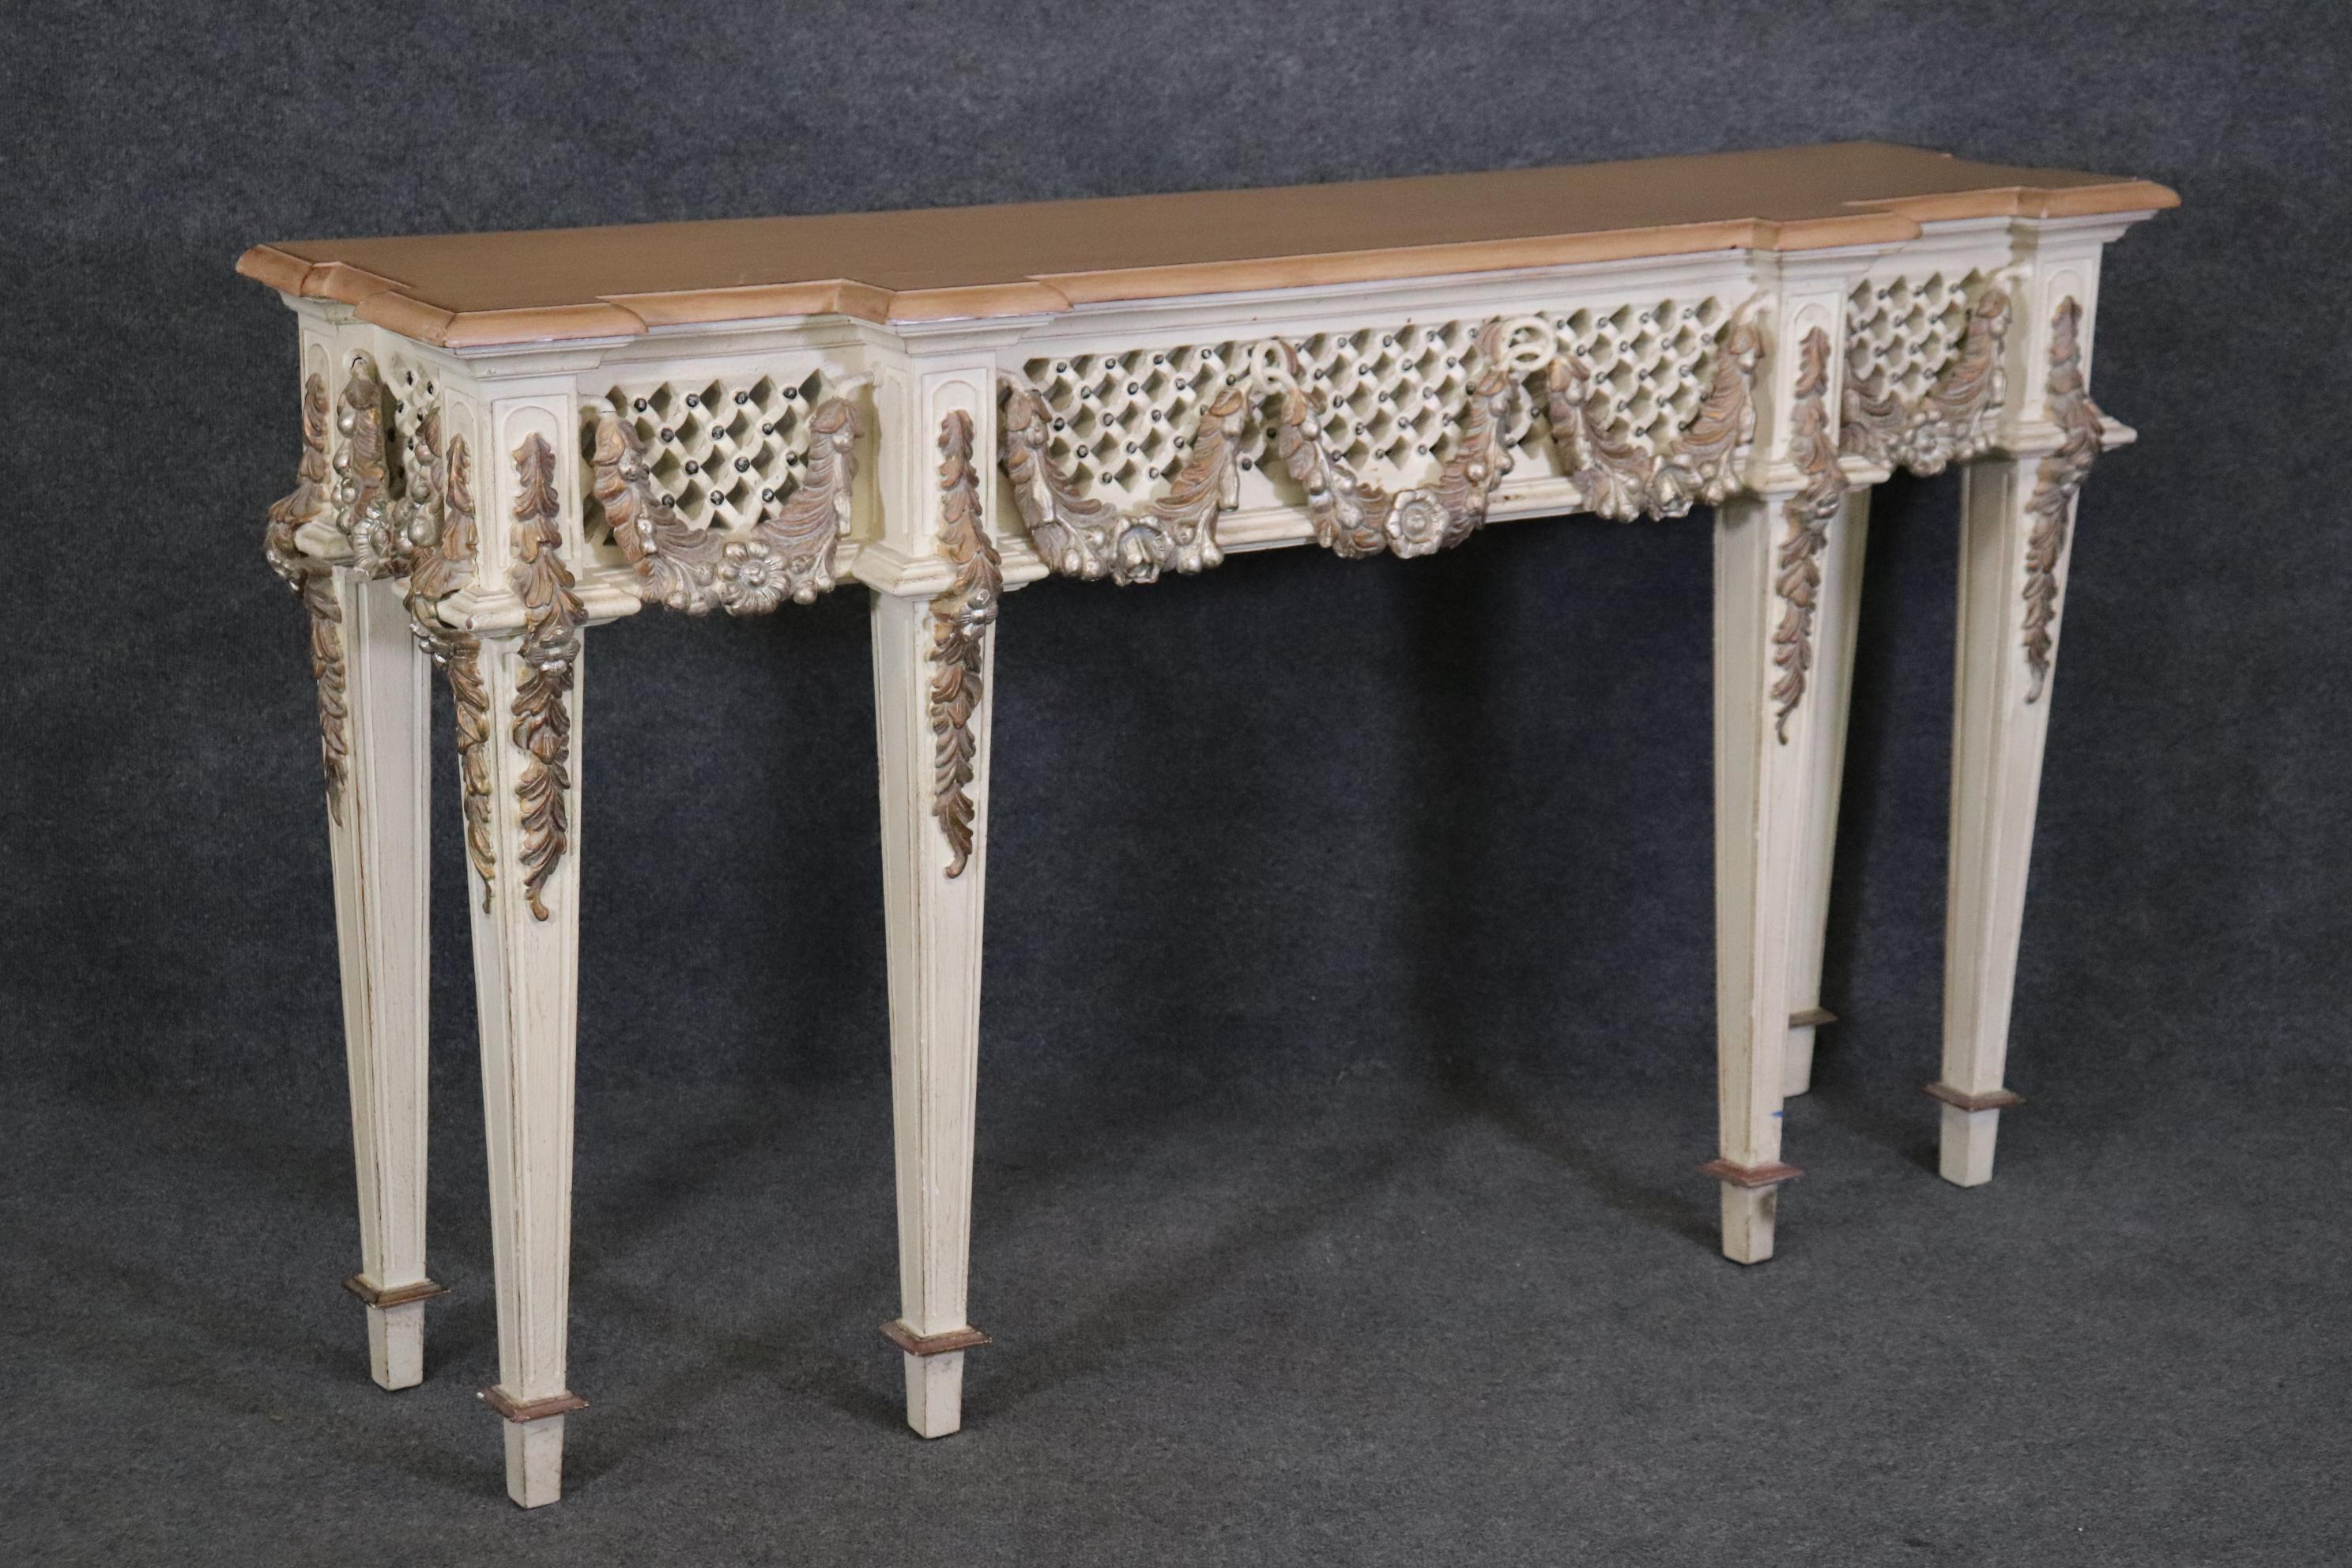 This is a fantastic heavily carved console table and is ready to go. The table measures 35 tall x 61.25 wide x 16.25 deep. Dates to the 1960s era. 





We can help with shipping to the ground floor or elevator buildings if requested prior to